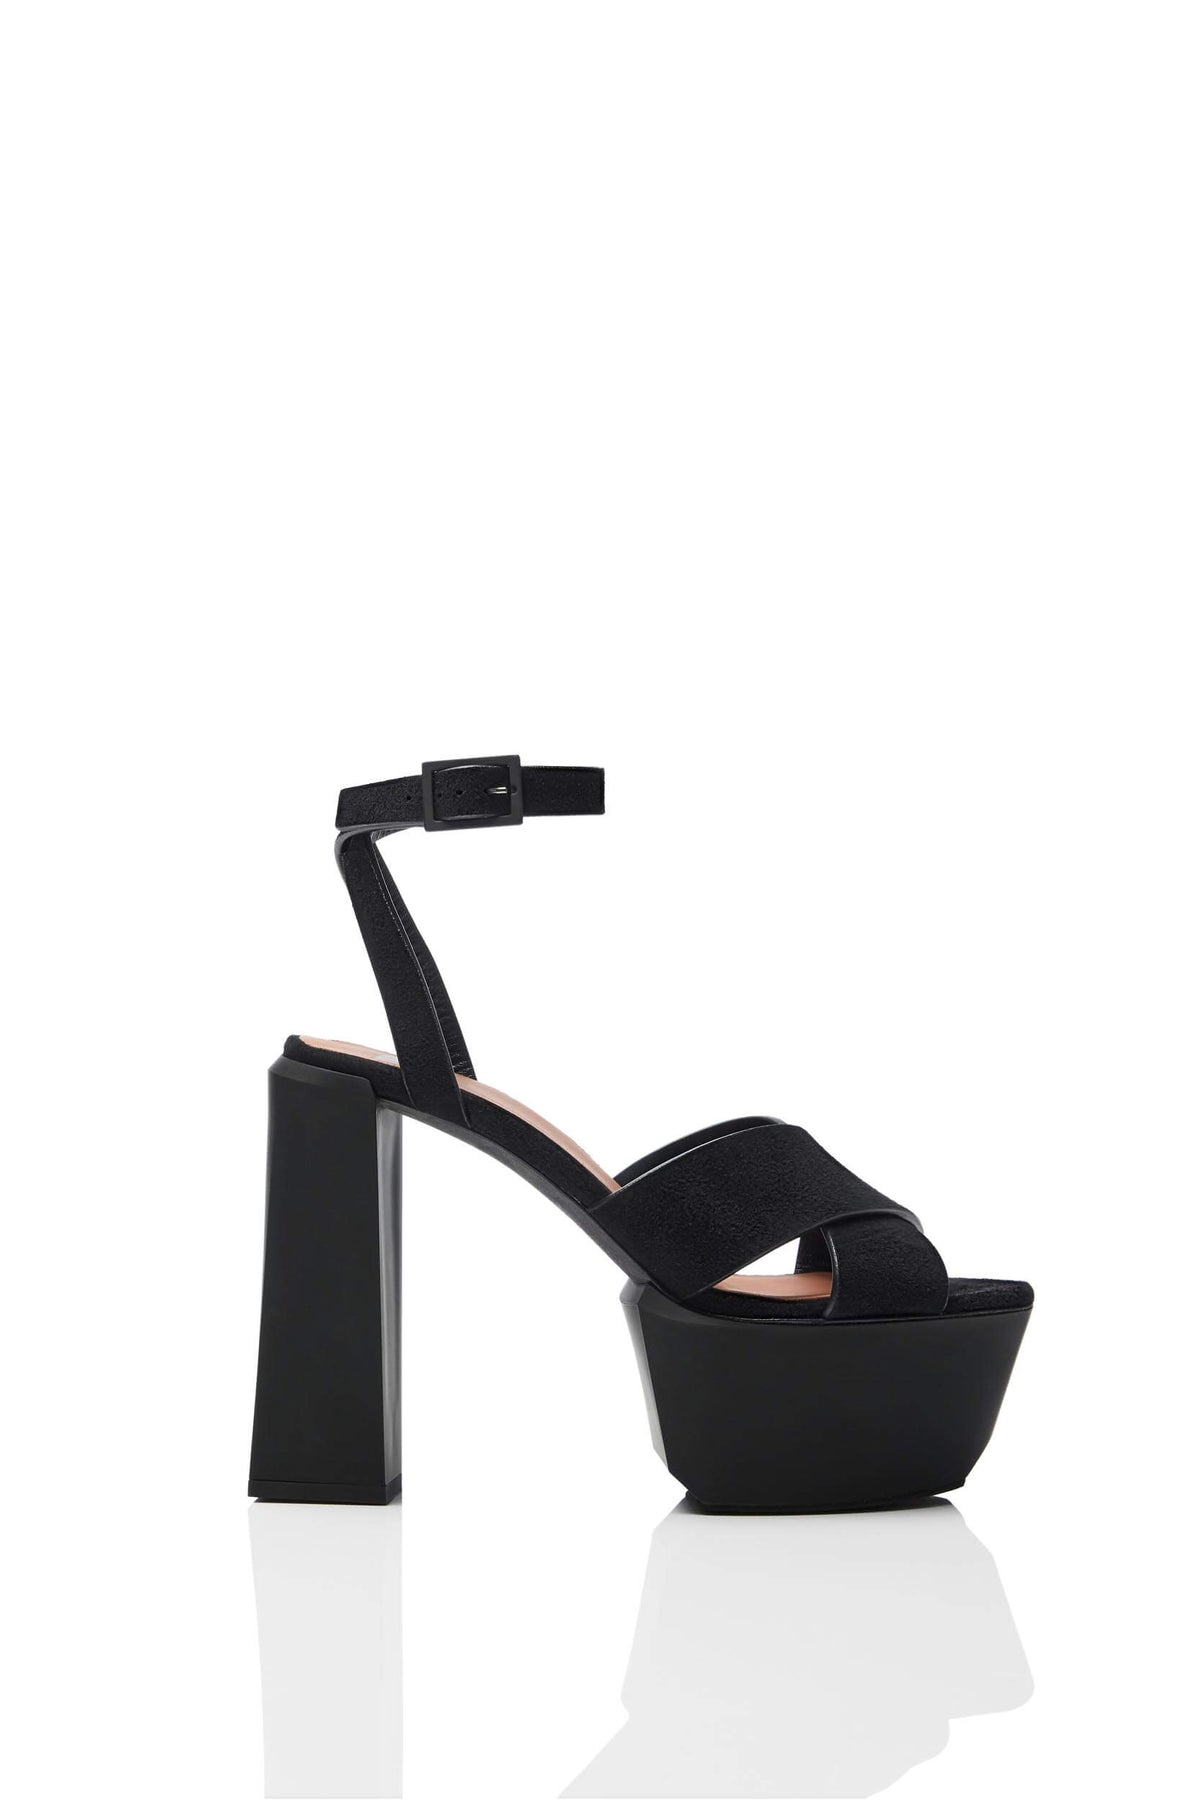 HAIKI 601 - Wide band, crisscross sandal, with self-adjusting ankle strap. Soft Kidsuede with hand-coated edges in black. 